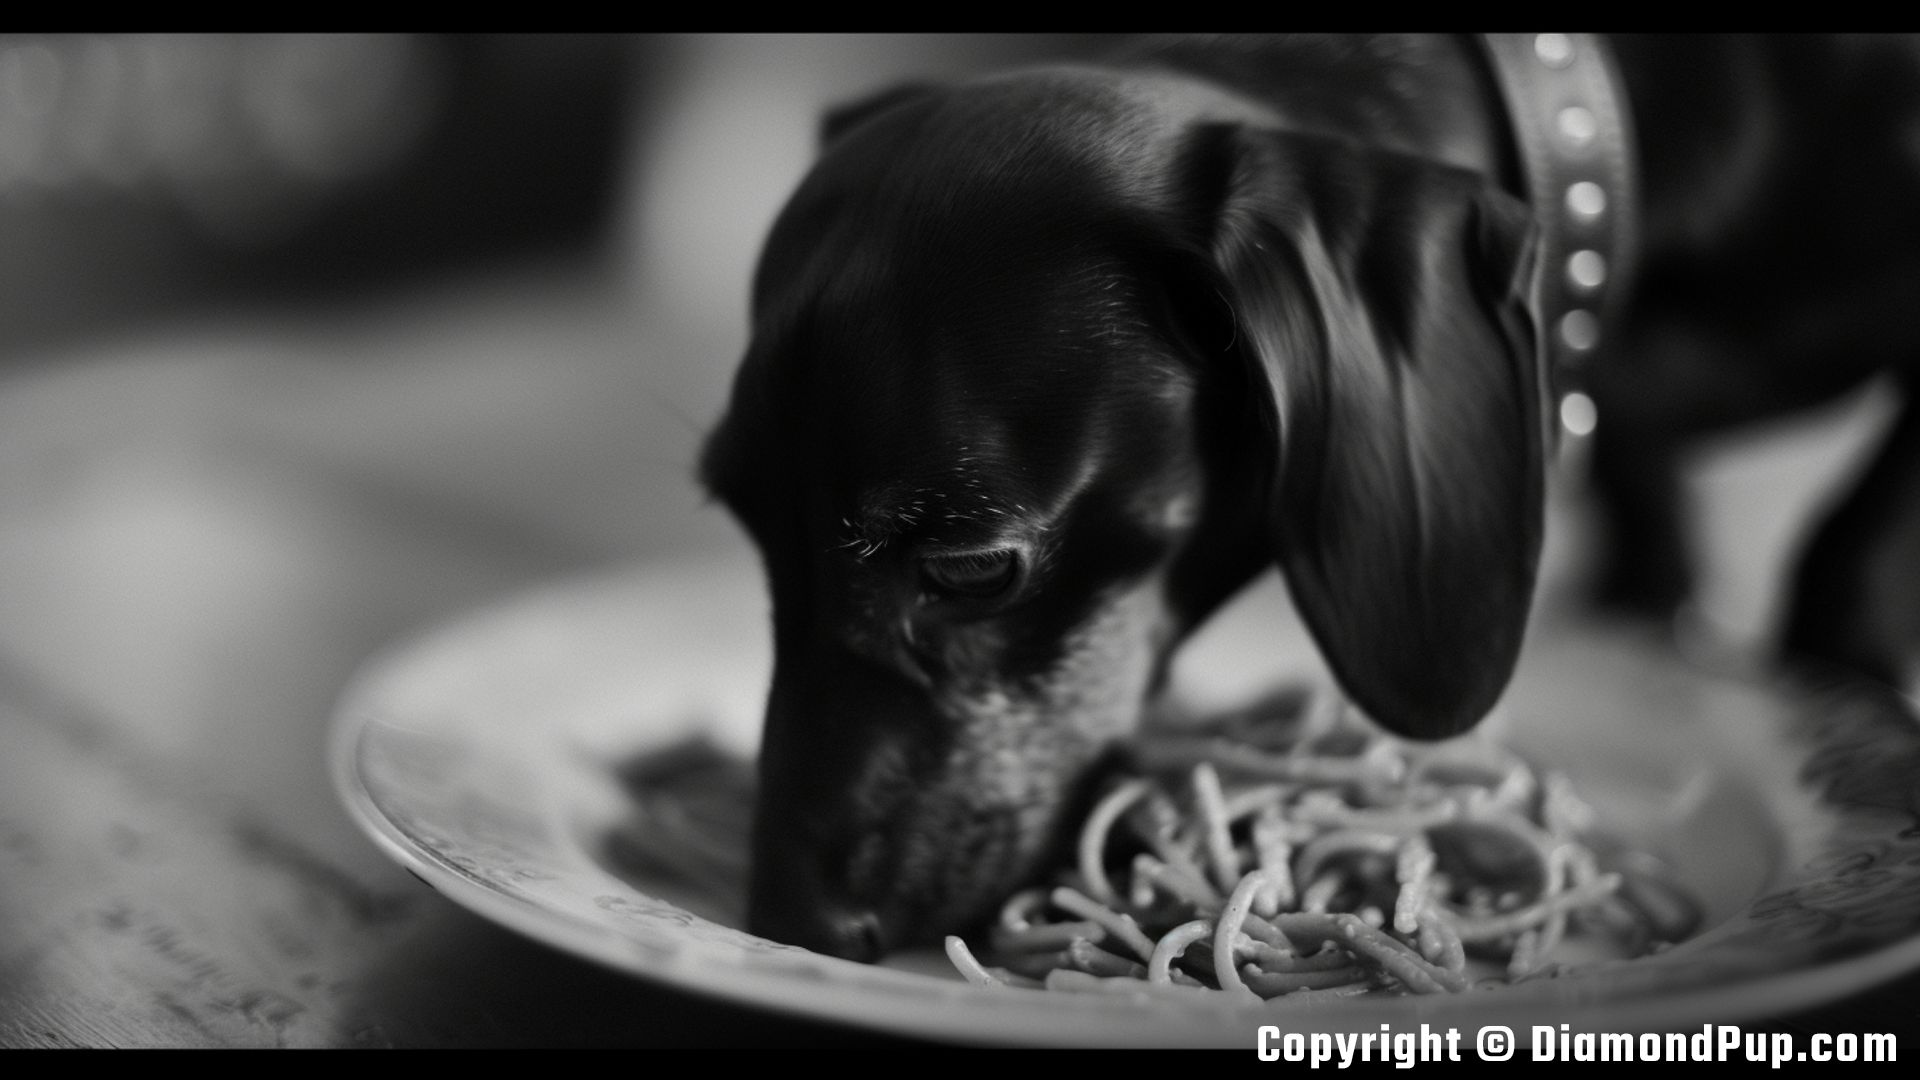 Photograph of a Cute Dachshund Snacking on Pasta